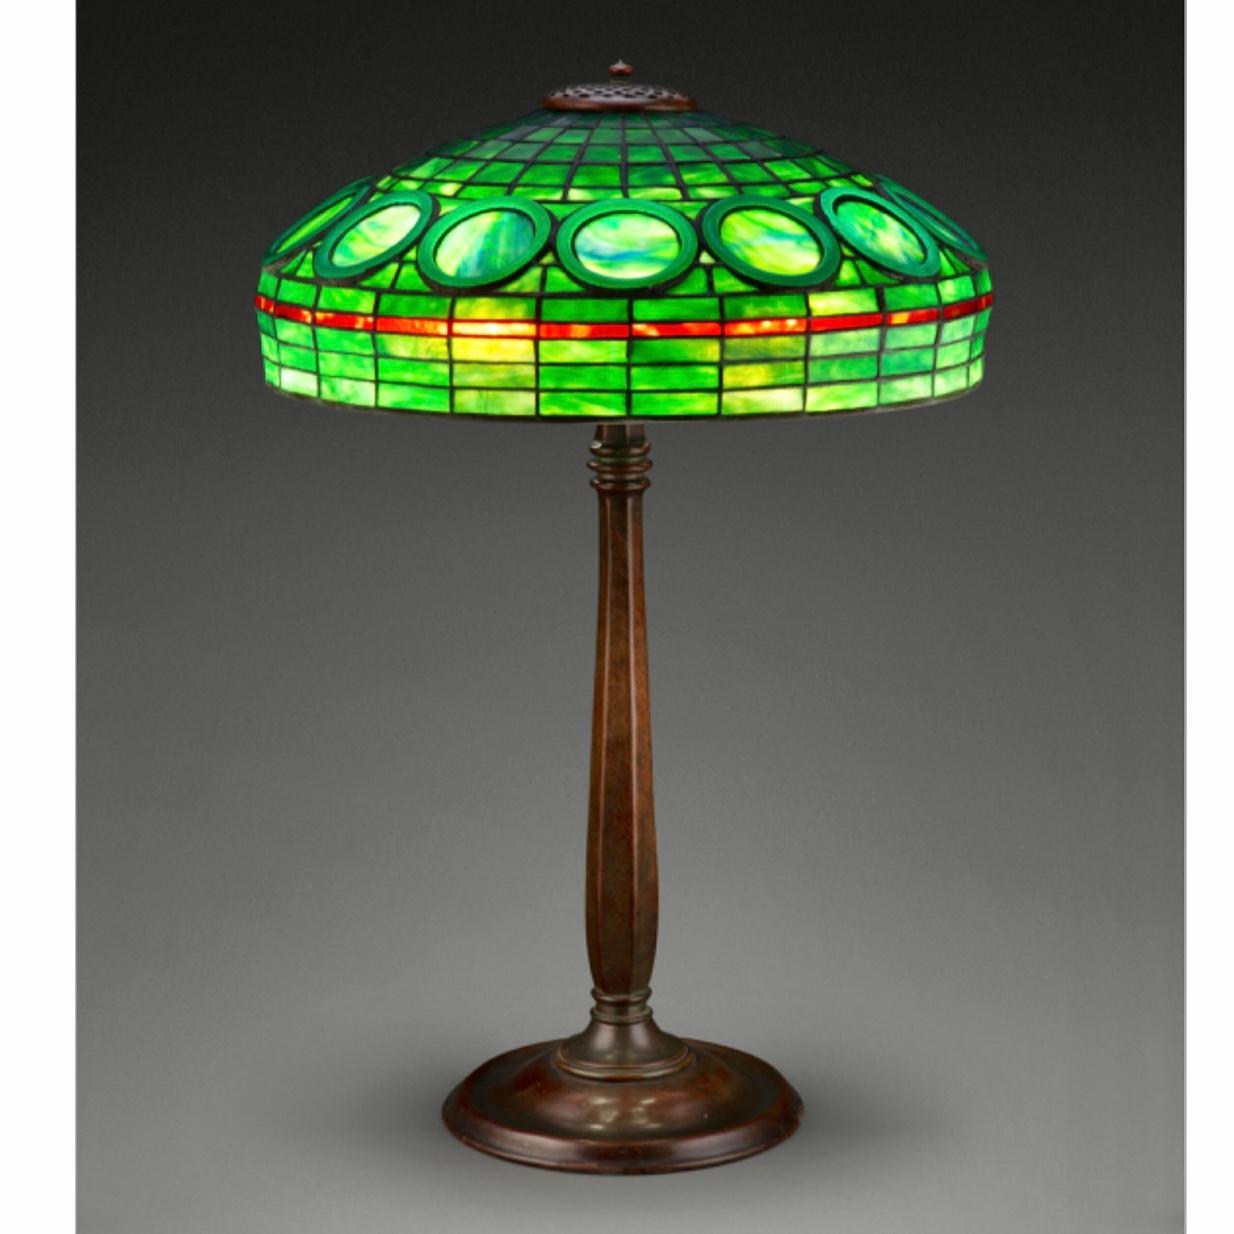 Rare Tiffany Studios Leaded Glass and Patinated Bronze Geometric Table Lamp, circa 1910.
This is a rare one of a kind early Tiffany Studios large table lamp that is illustrated in Alastair Duncan’s catalog Raisonne. This lamp is the cutlass one